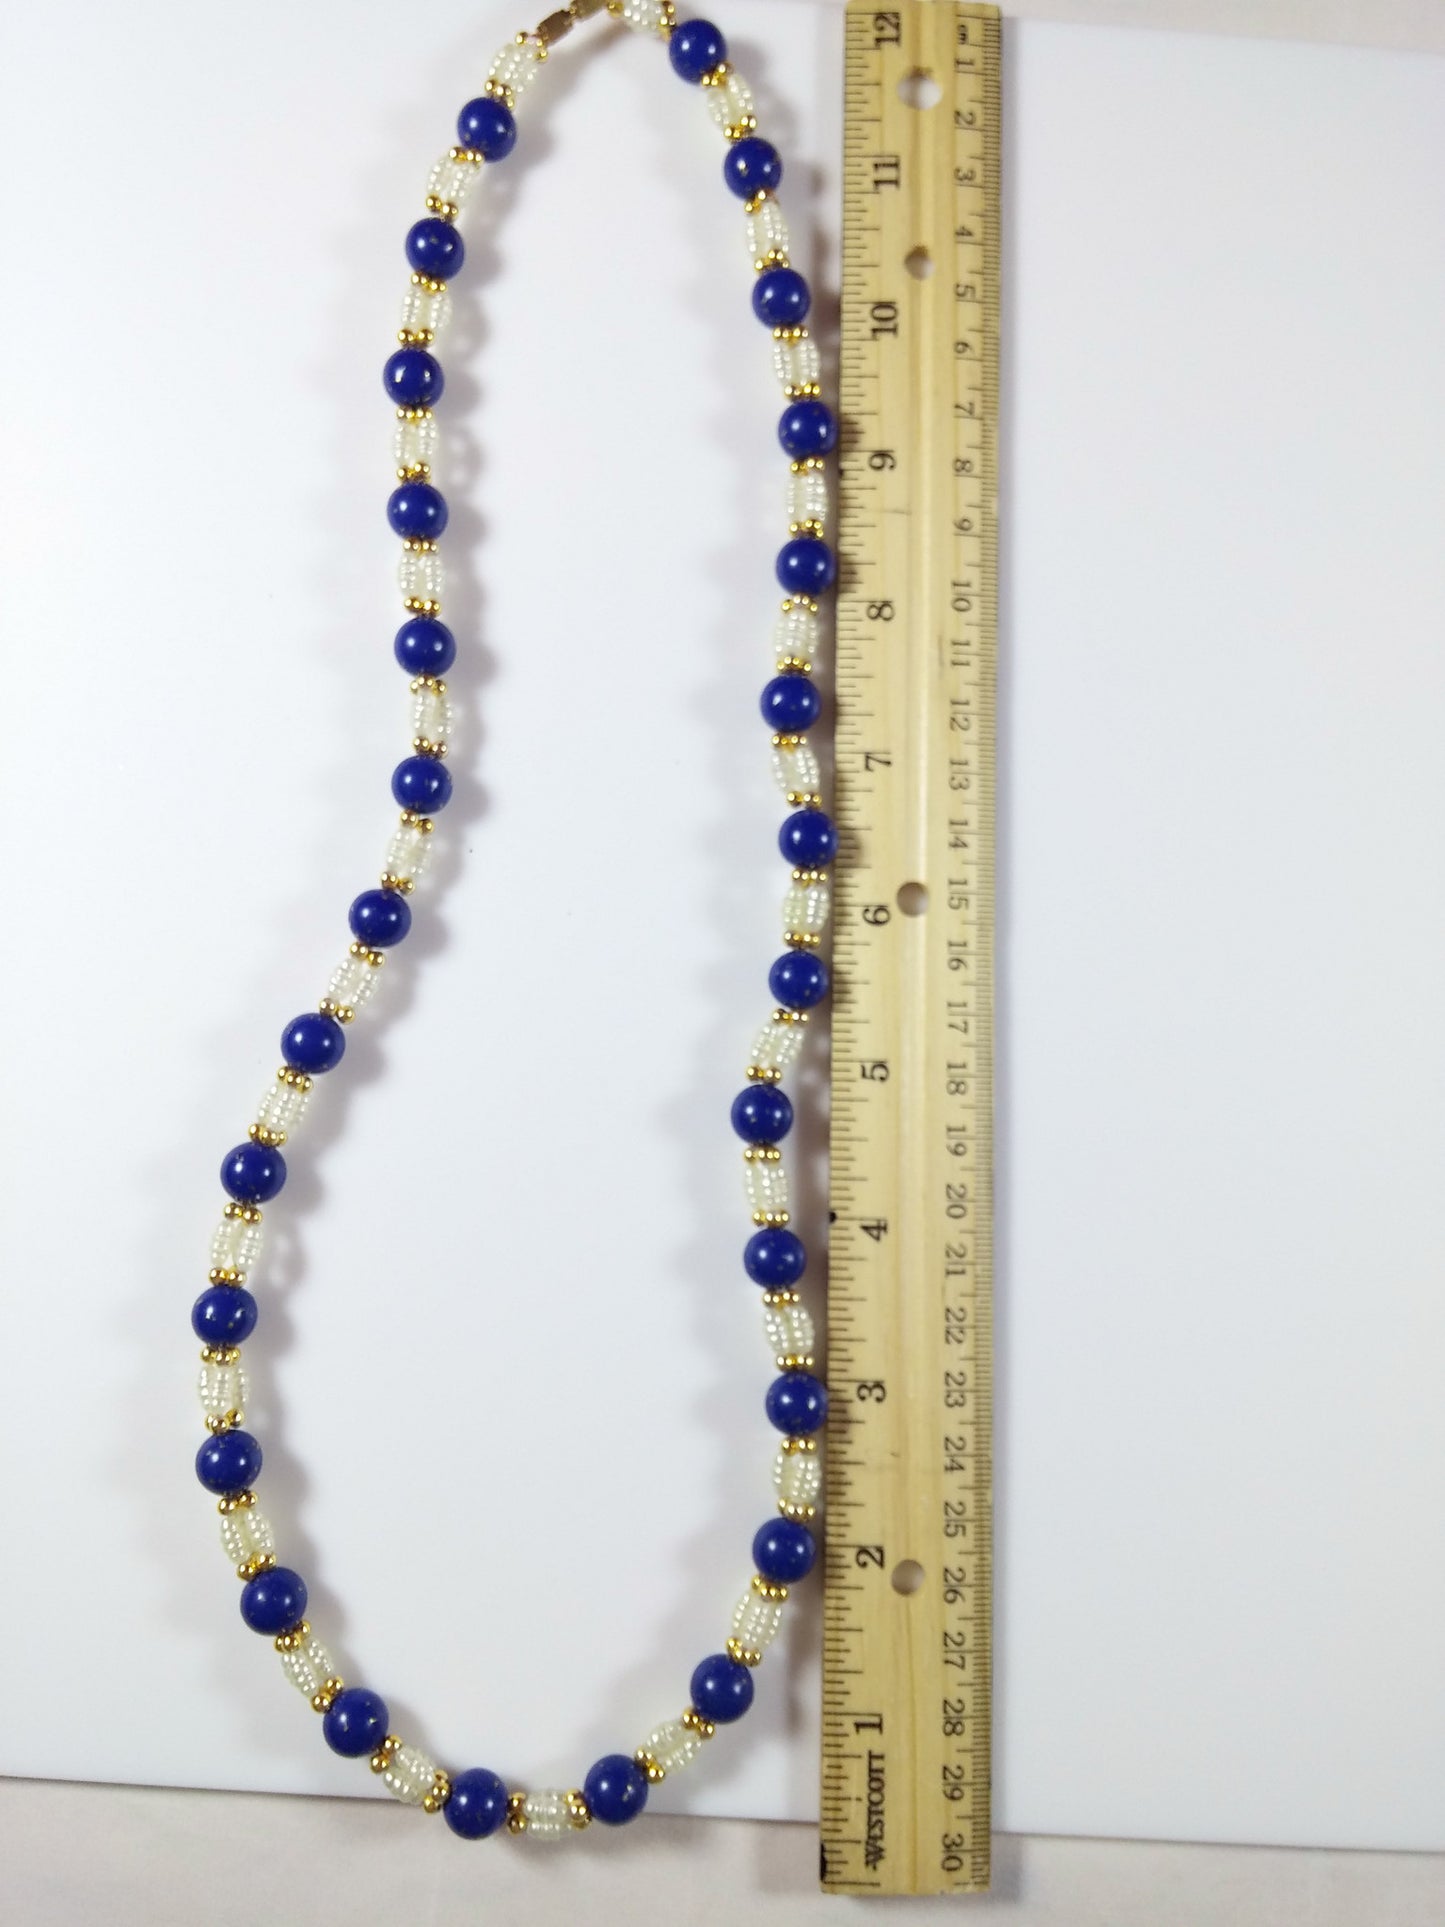 Vintage 50s 60s Necklace Fresh Water Pearl and Blue Beads w/ Gold Flecks - Dirty 30 Vintage | Vintage Clothing, Vintage Jewelry, Vintage Accessories